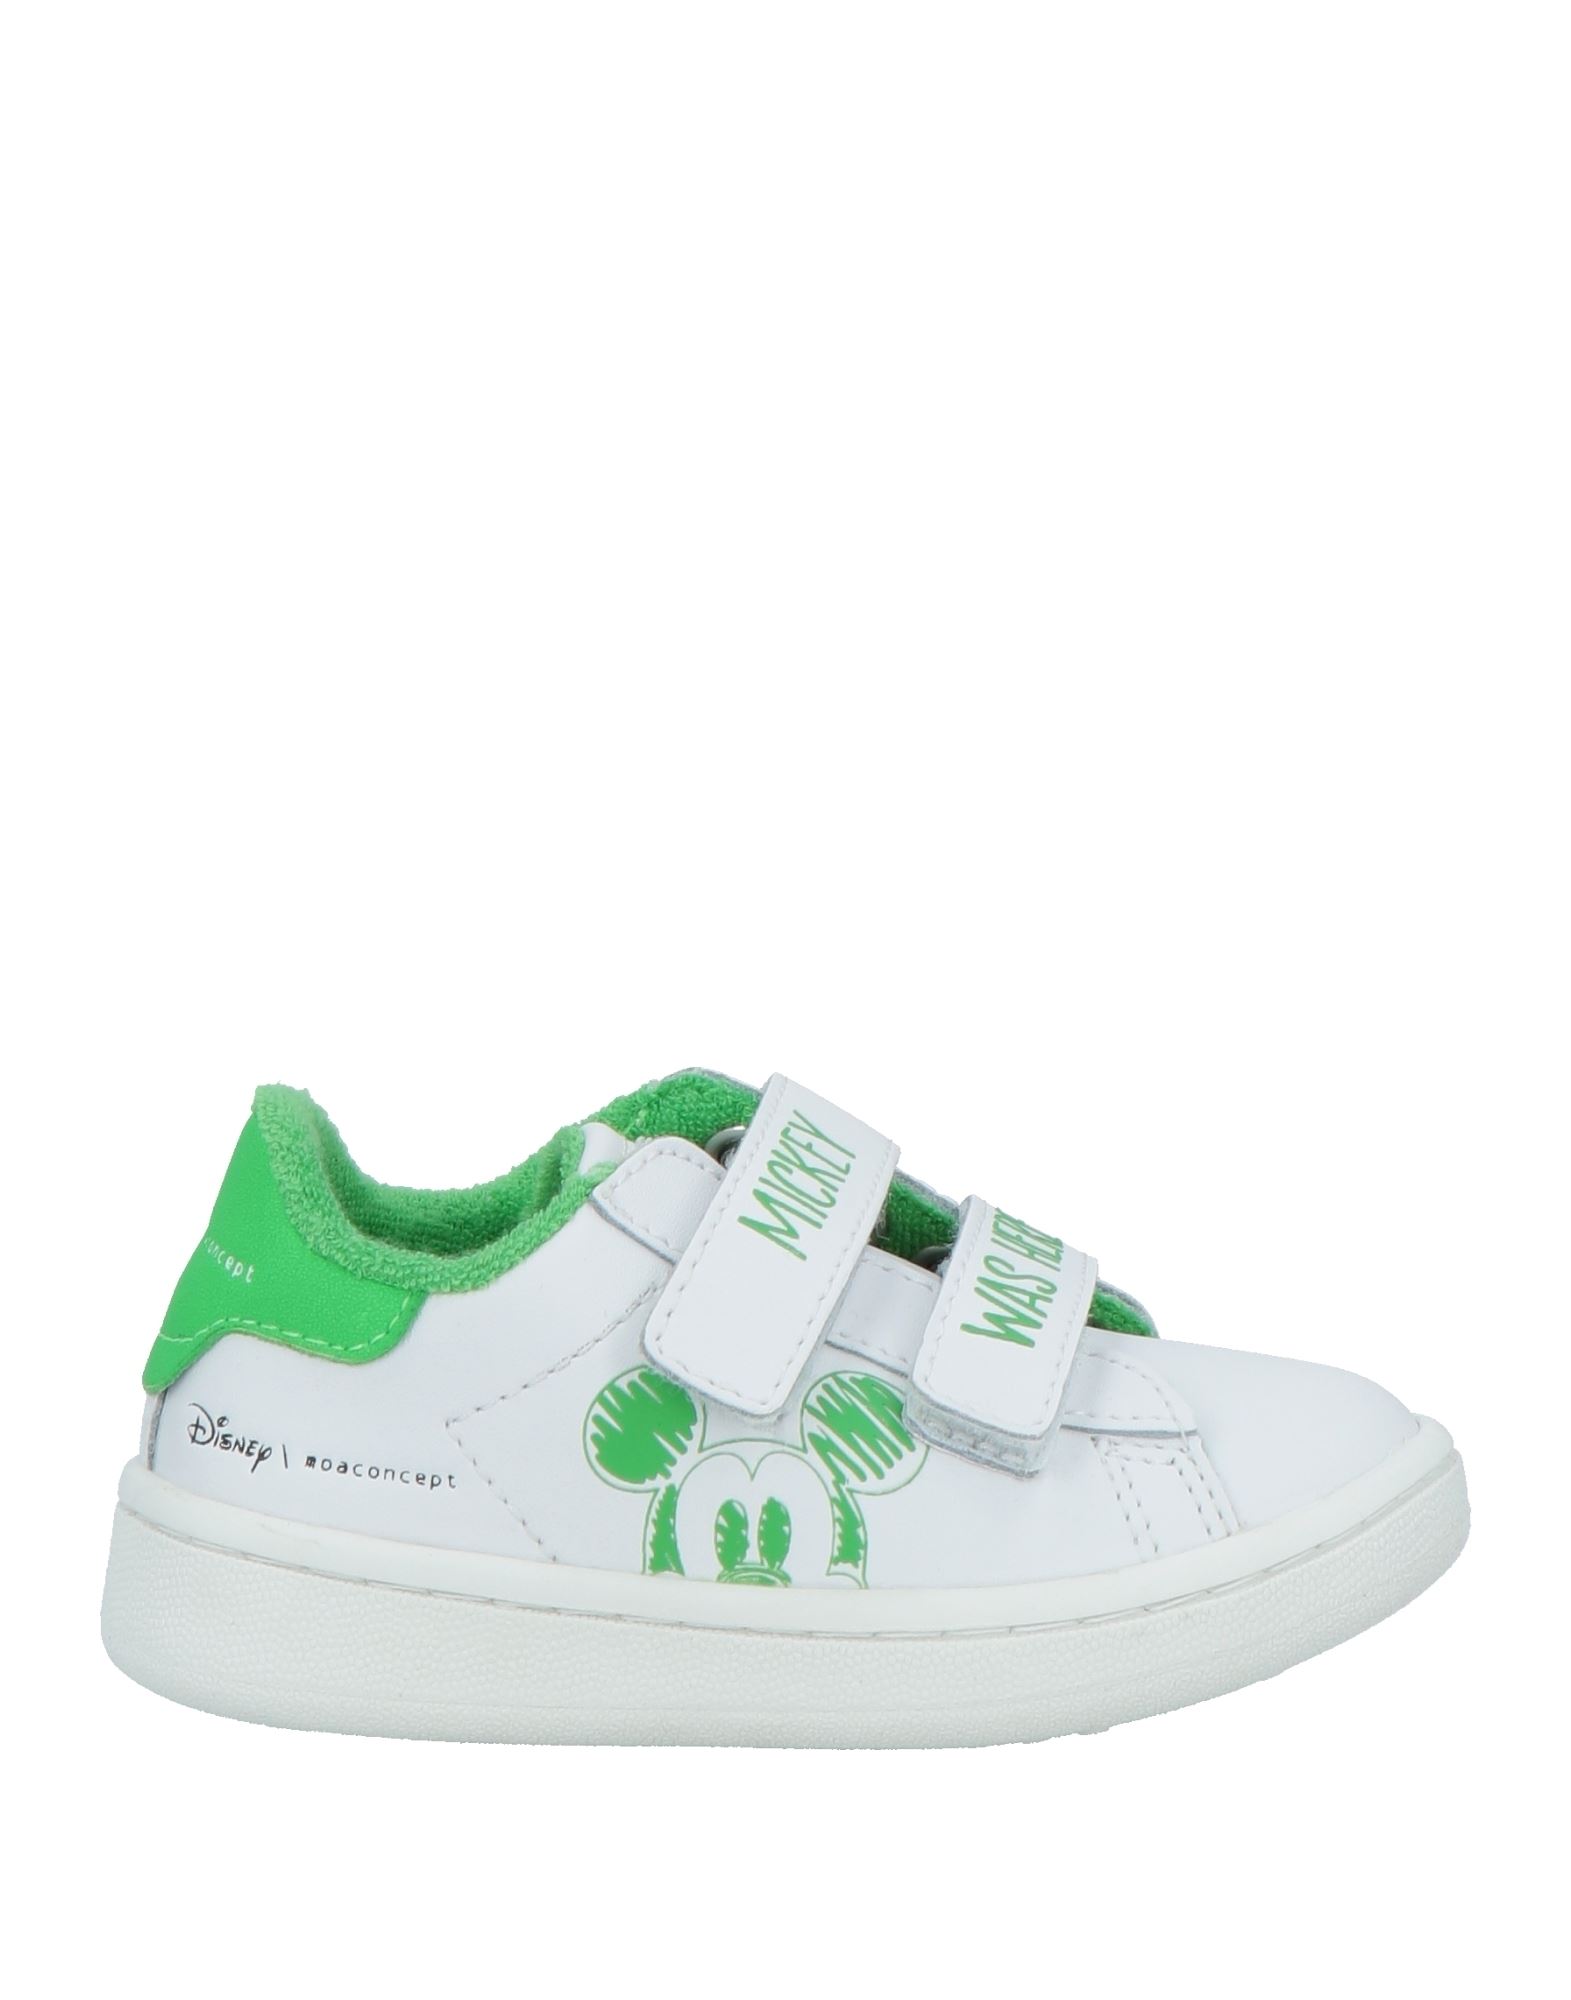 MOACONCEPT Sneakers Kinder Weiß von MOACONCEPT